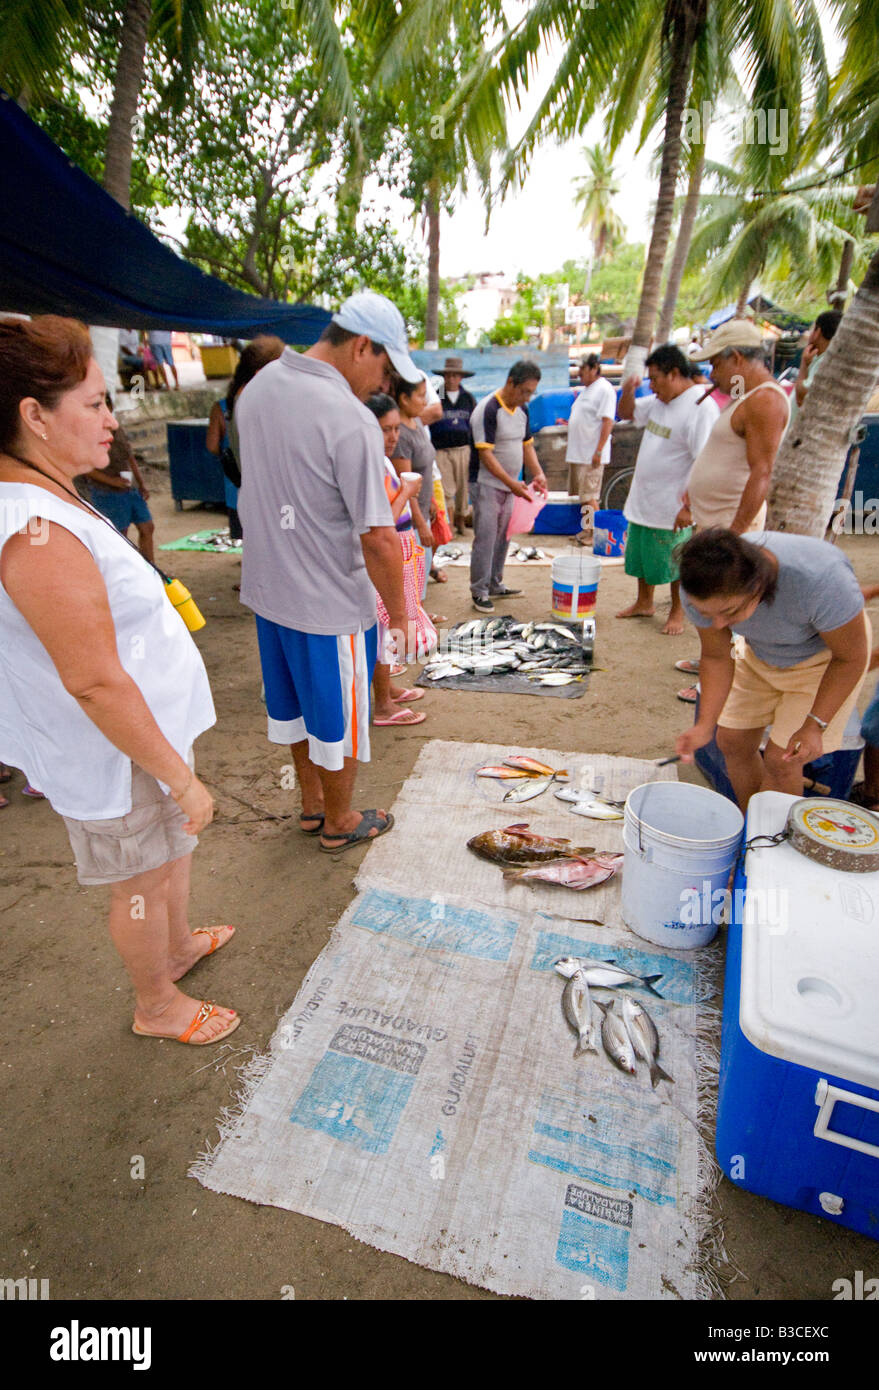 ZIHUATANEJO, Mexico - The fish market on the beach at Playa Principal, Zihuatanejo, Mexico. When the local fisherman return about dawn, they sell their catches at a beach fish market to early morning buyers. Being a traditional fishing village, the seafood in Zihuatanejo is superb. Stock Photo